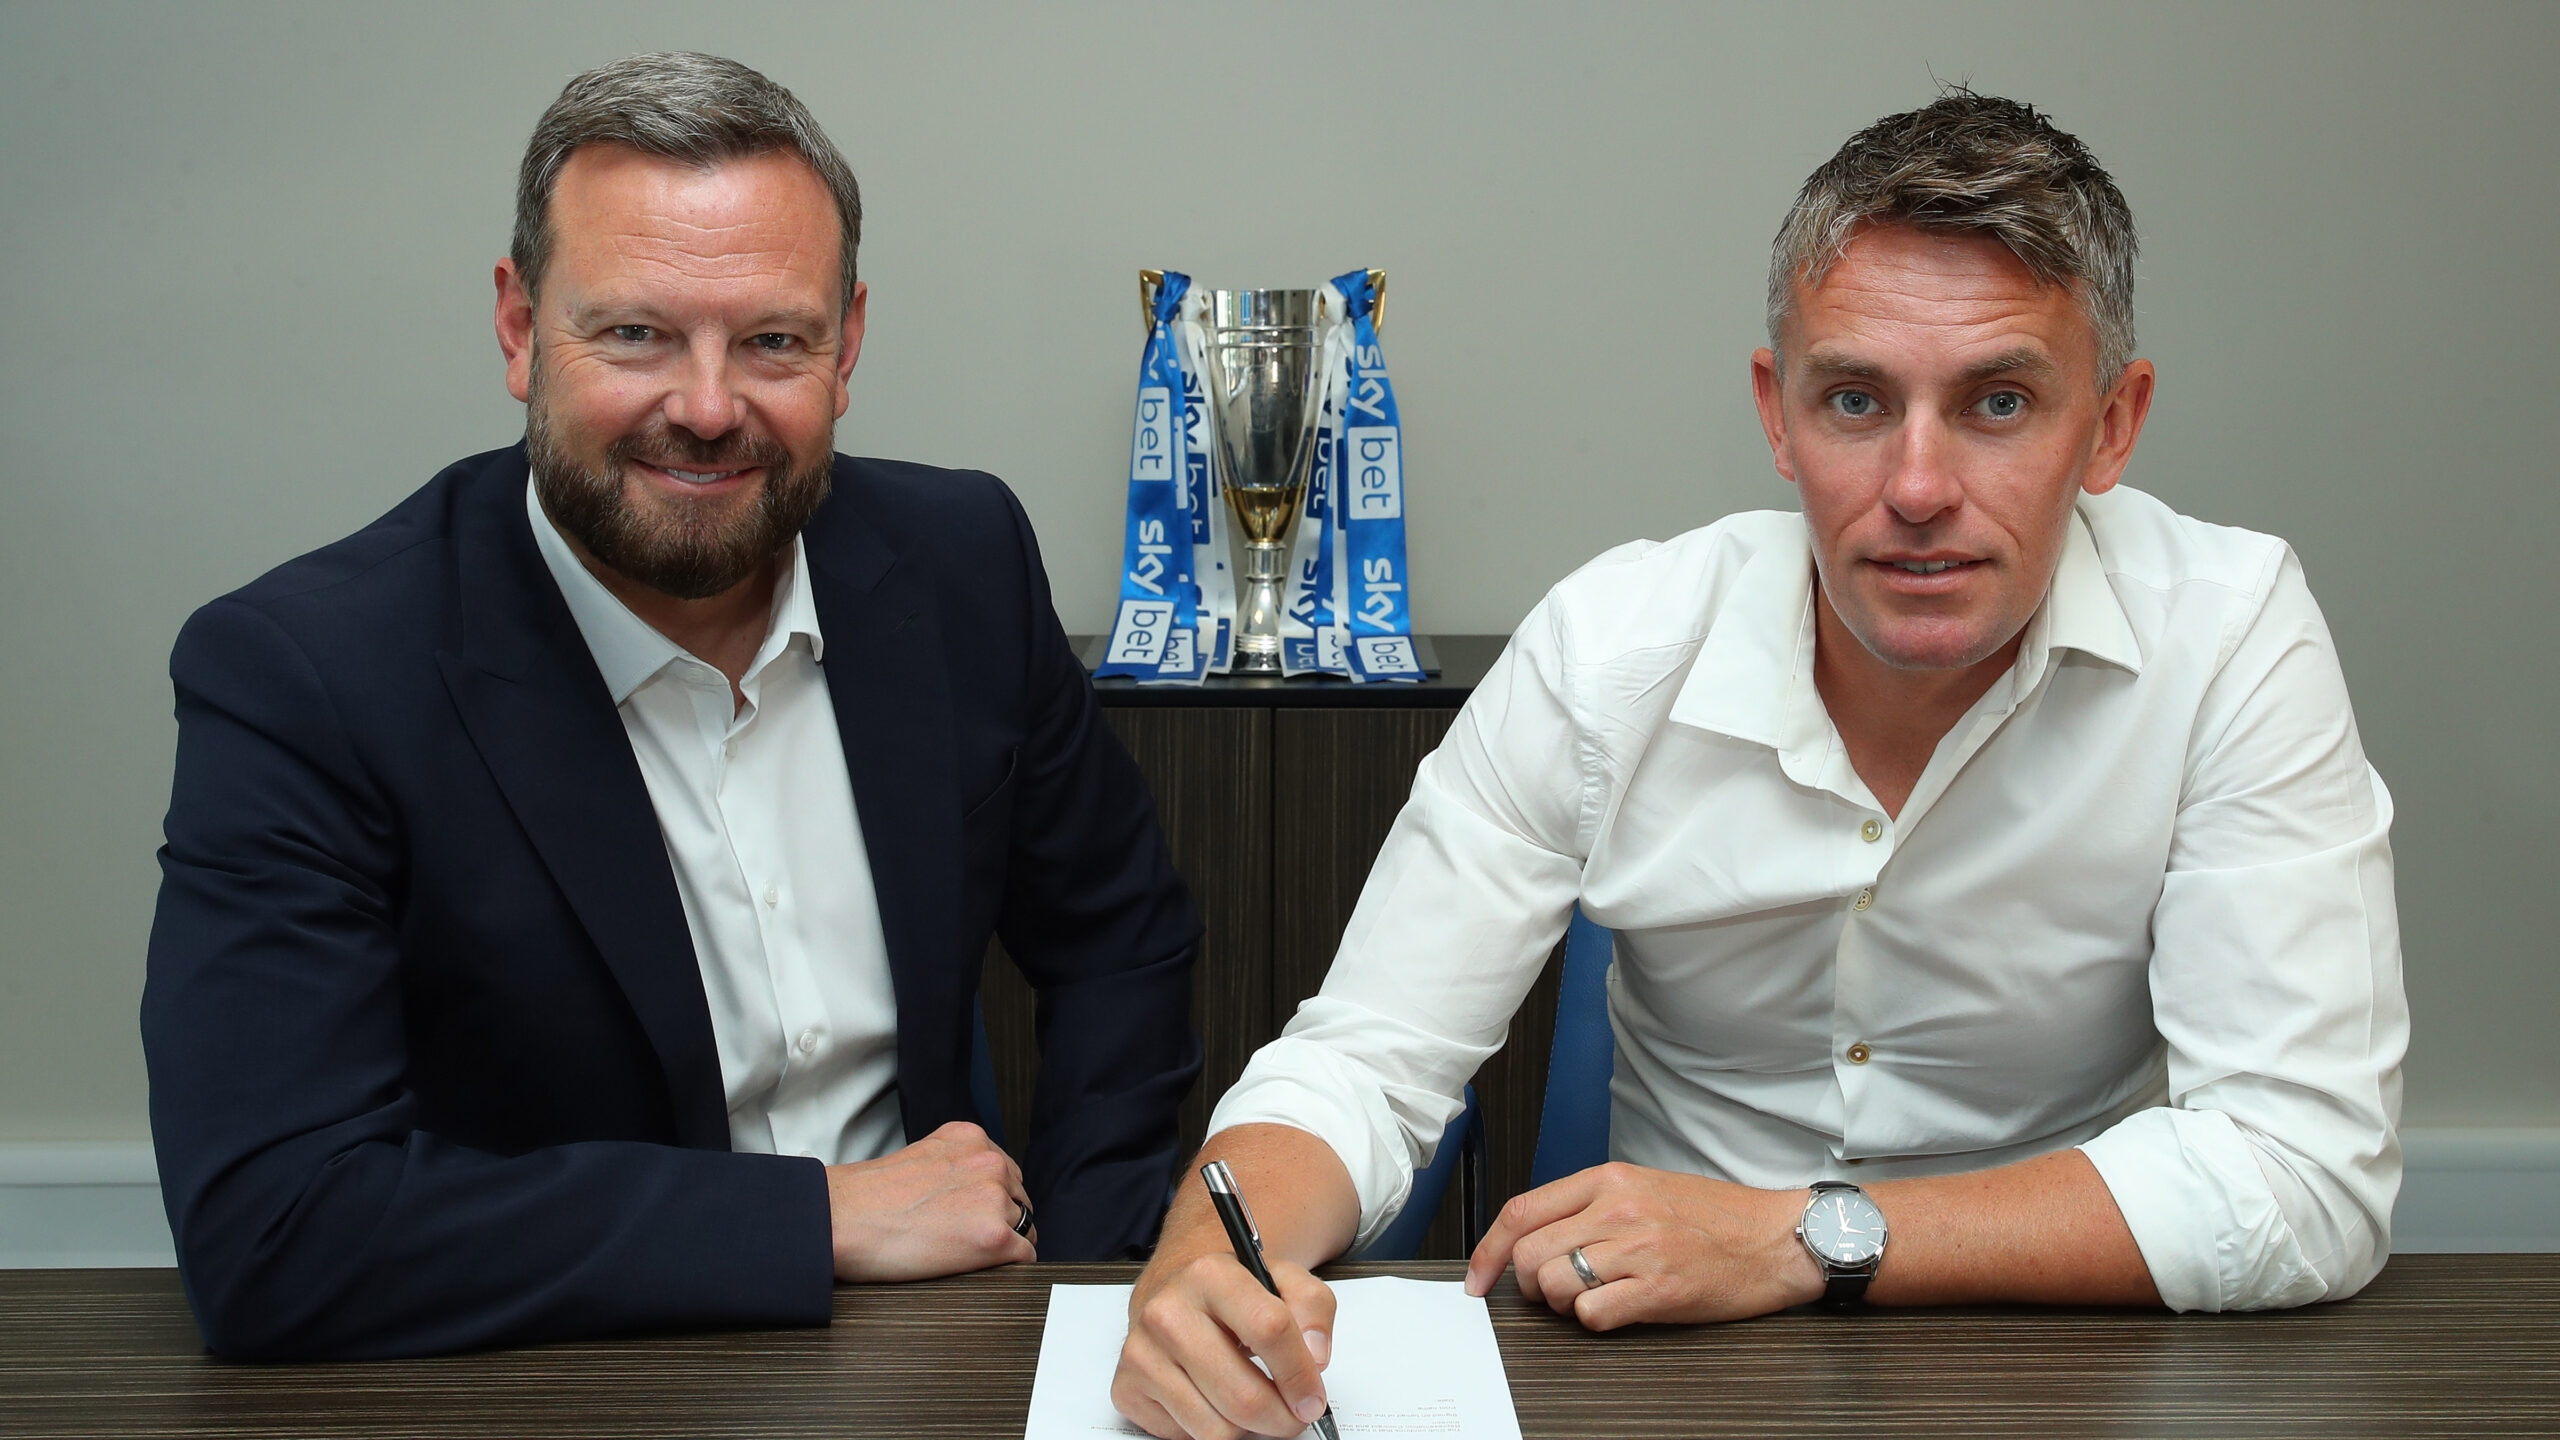 CELEBRATION TAKE PLACE: As Kieran McKenna to Extend Stay with Ipswich Town: Ending Speculation with New Deal with an agreement of Five years contract deal